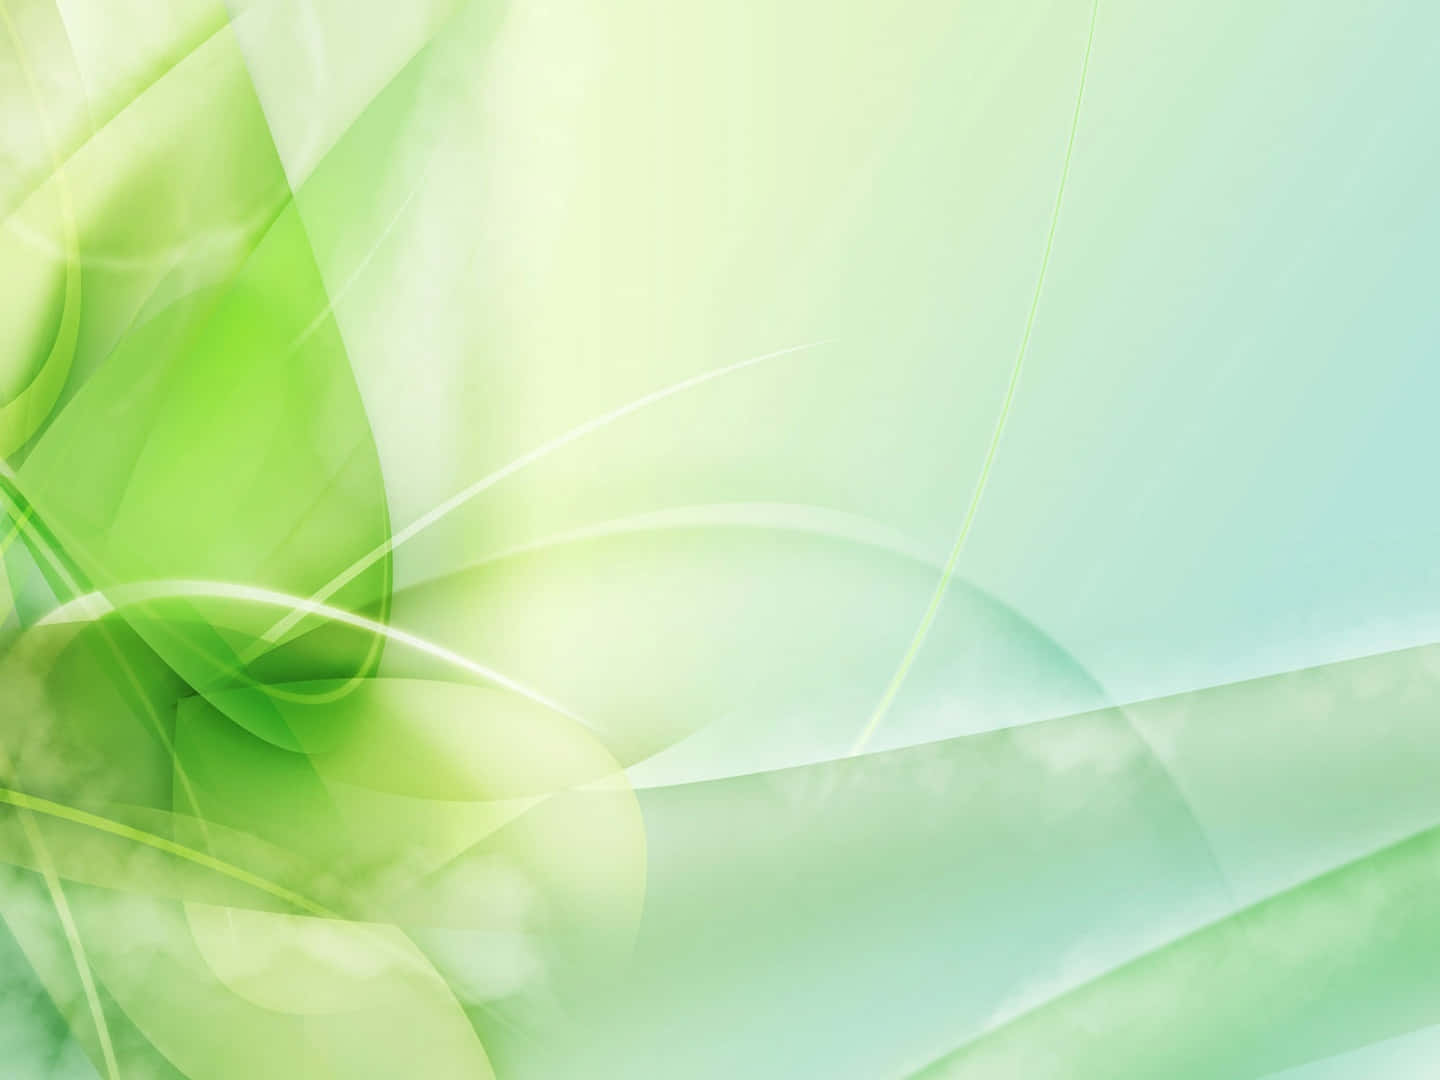 Light Green Abstract Wave Curves Background